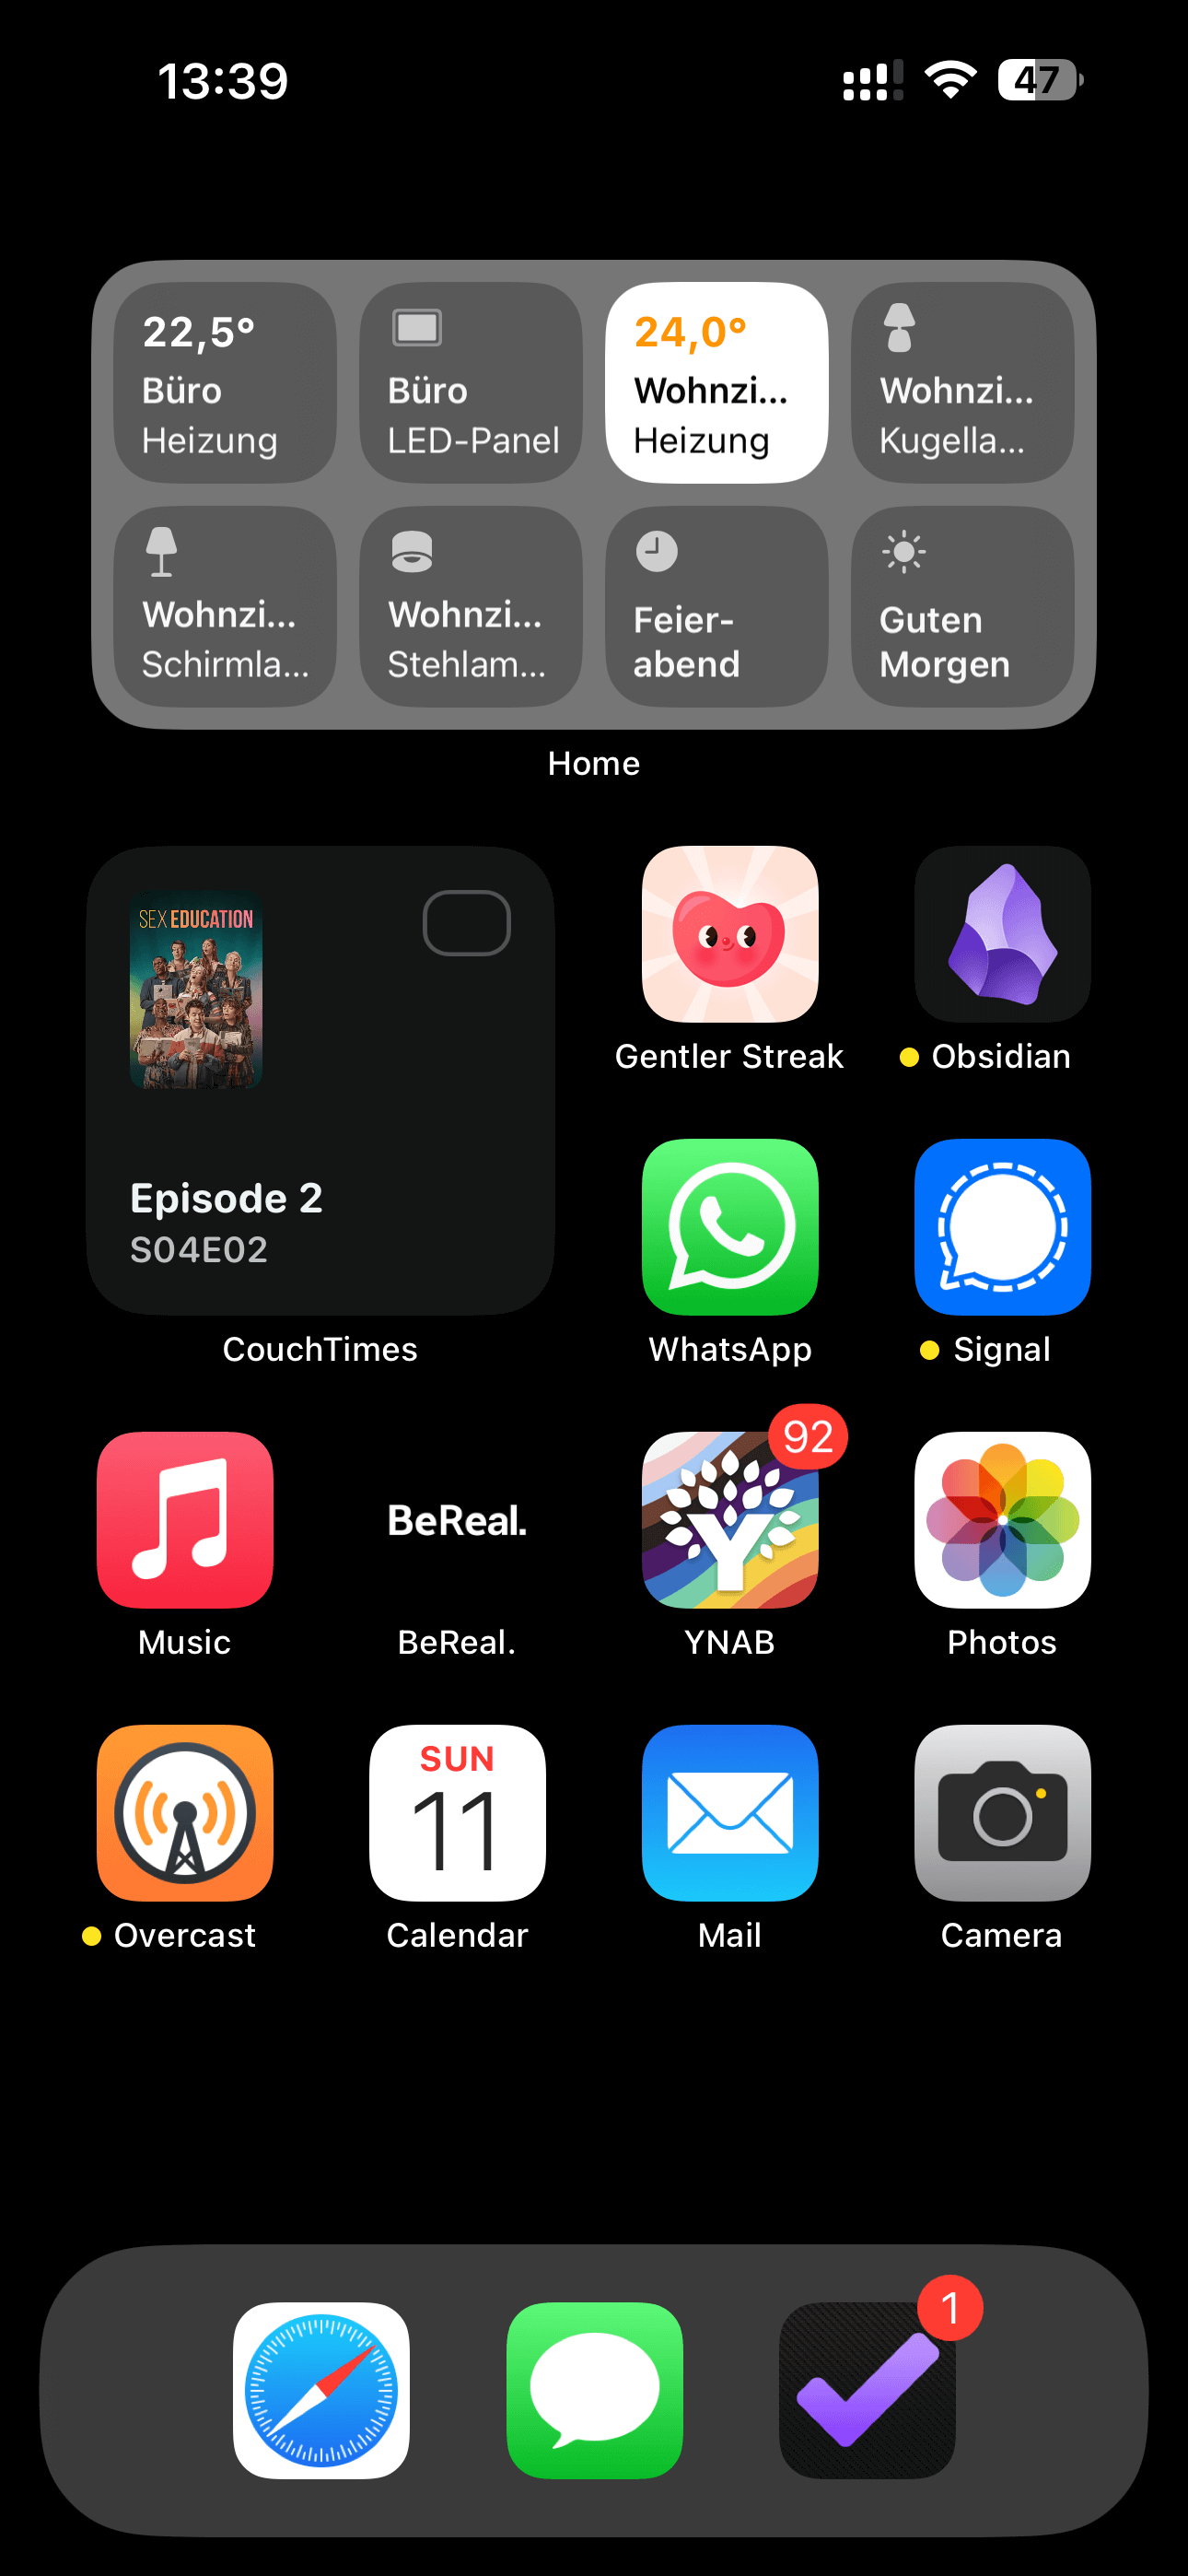 An iOS home screen with a black background and a medium Home.app widget at the top, showing 8 devices or scenes. Then there's a small CouchTimes widget showing the next unwatched episode of Sex Education. After that comes three rows of apps: Gentler Streak, Obsidian, WhatsApp, Signal, Music, BeReal, YNAB, Photos, Overcast, Calendar, Mail and Camera. The Dock has three apps: Safari, Messages and OmniFocus.